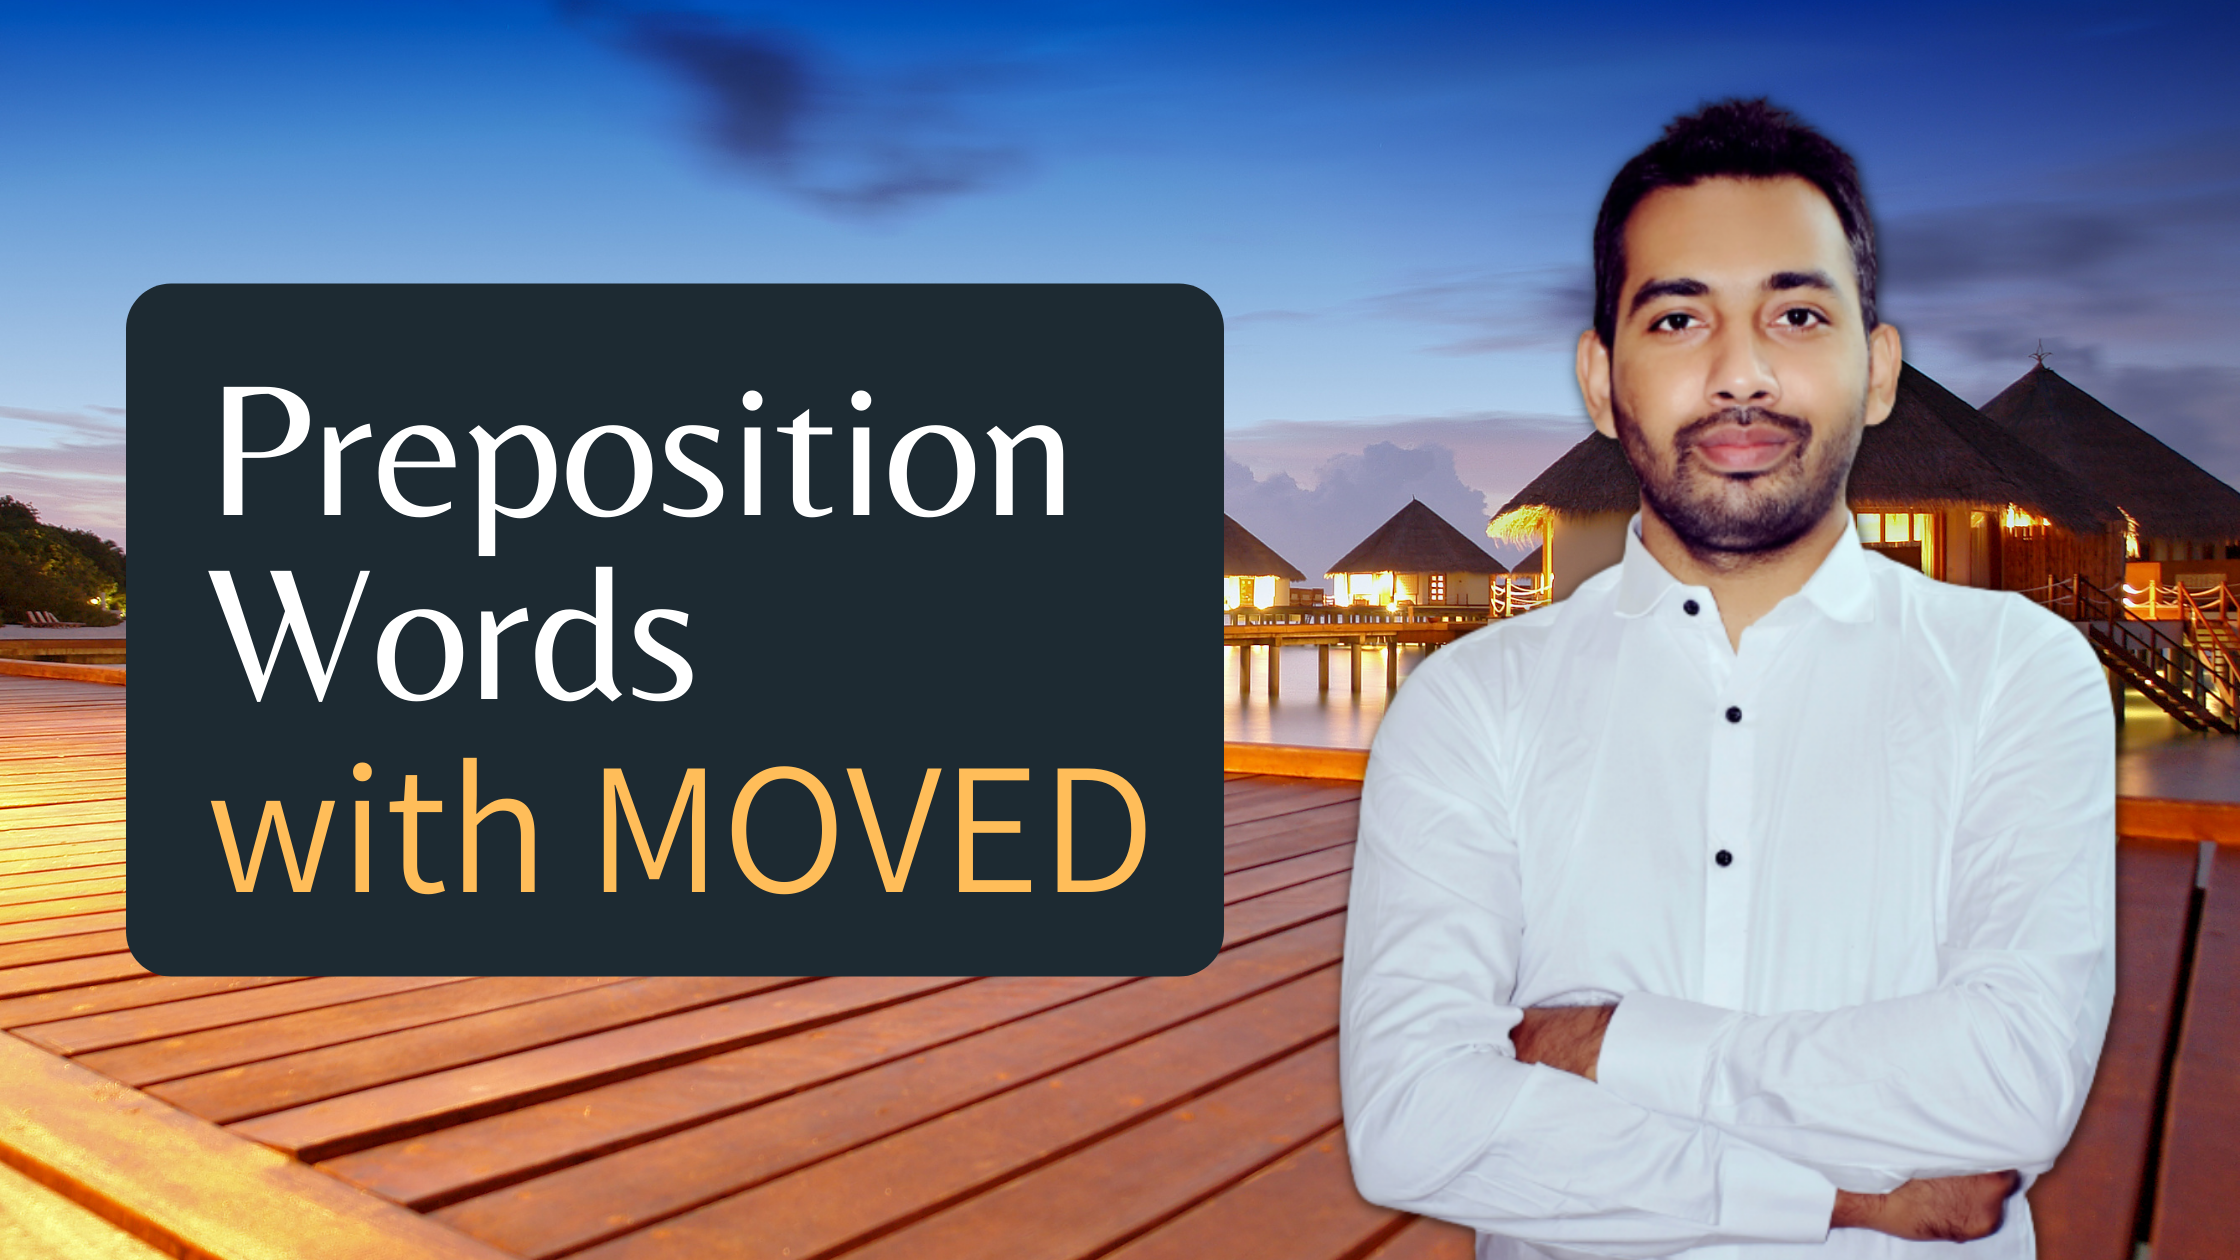 Preposition Words with Moved